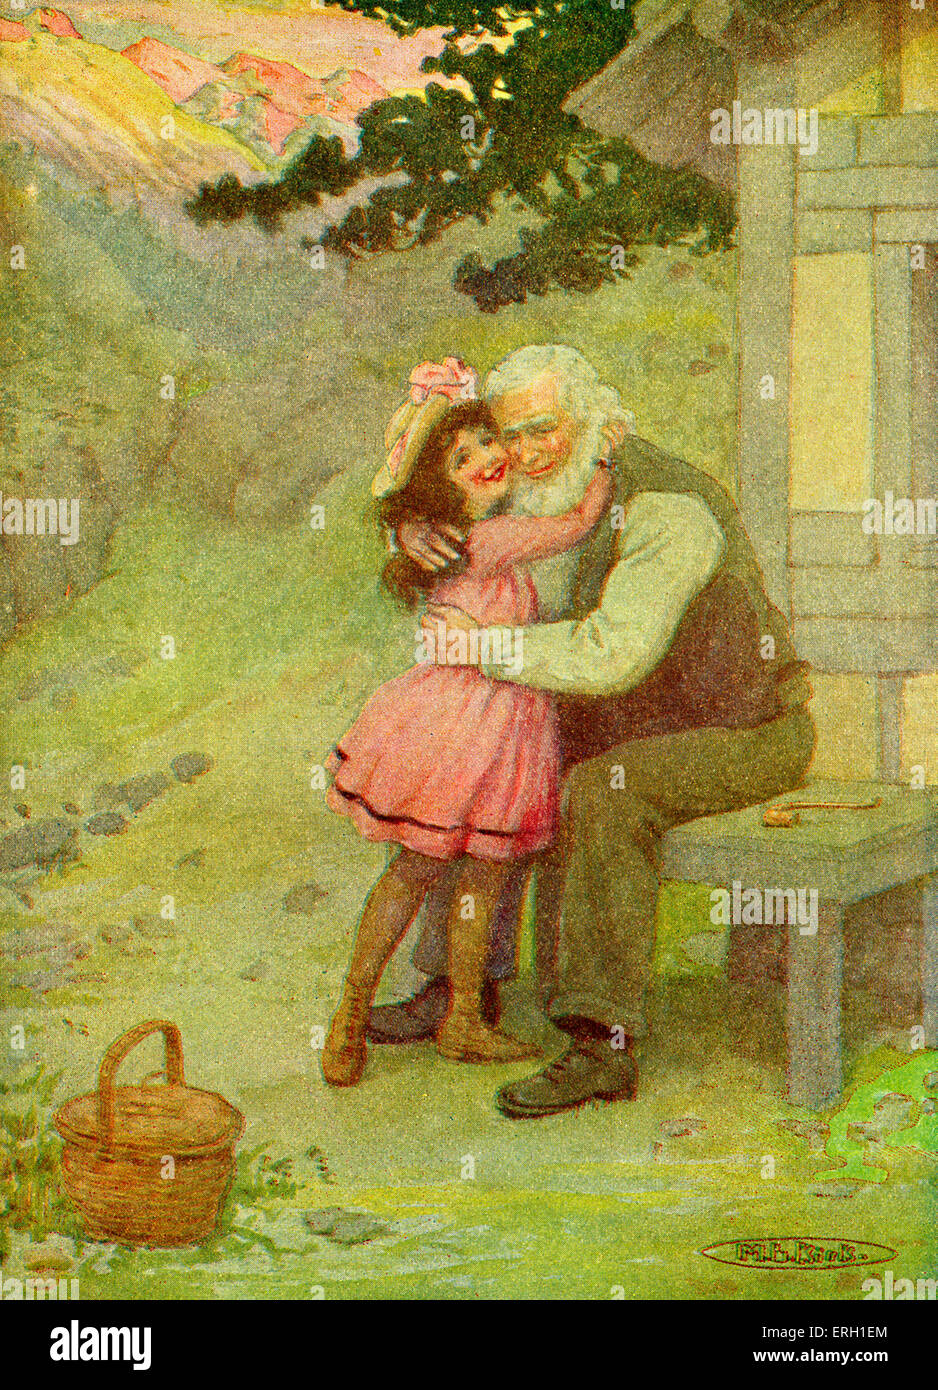 Heidi by Johanna Spyri. First published 1880. Caption reads: 'Throwing herself in her grandfather's arms, she held him tight.' Stock Photo